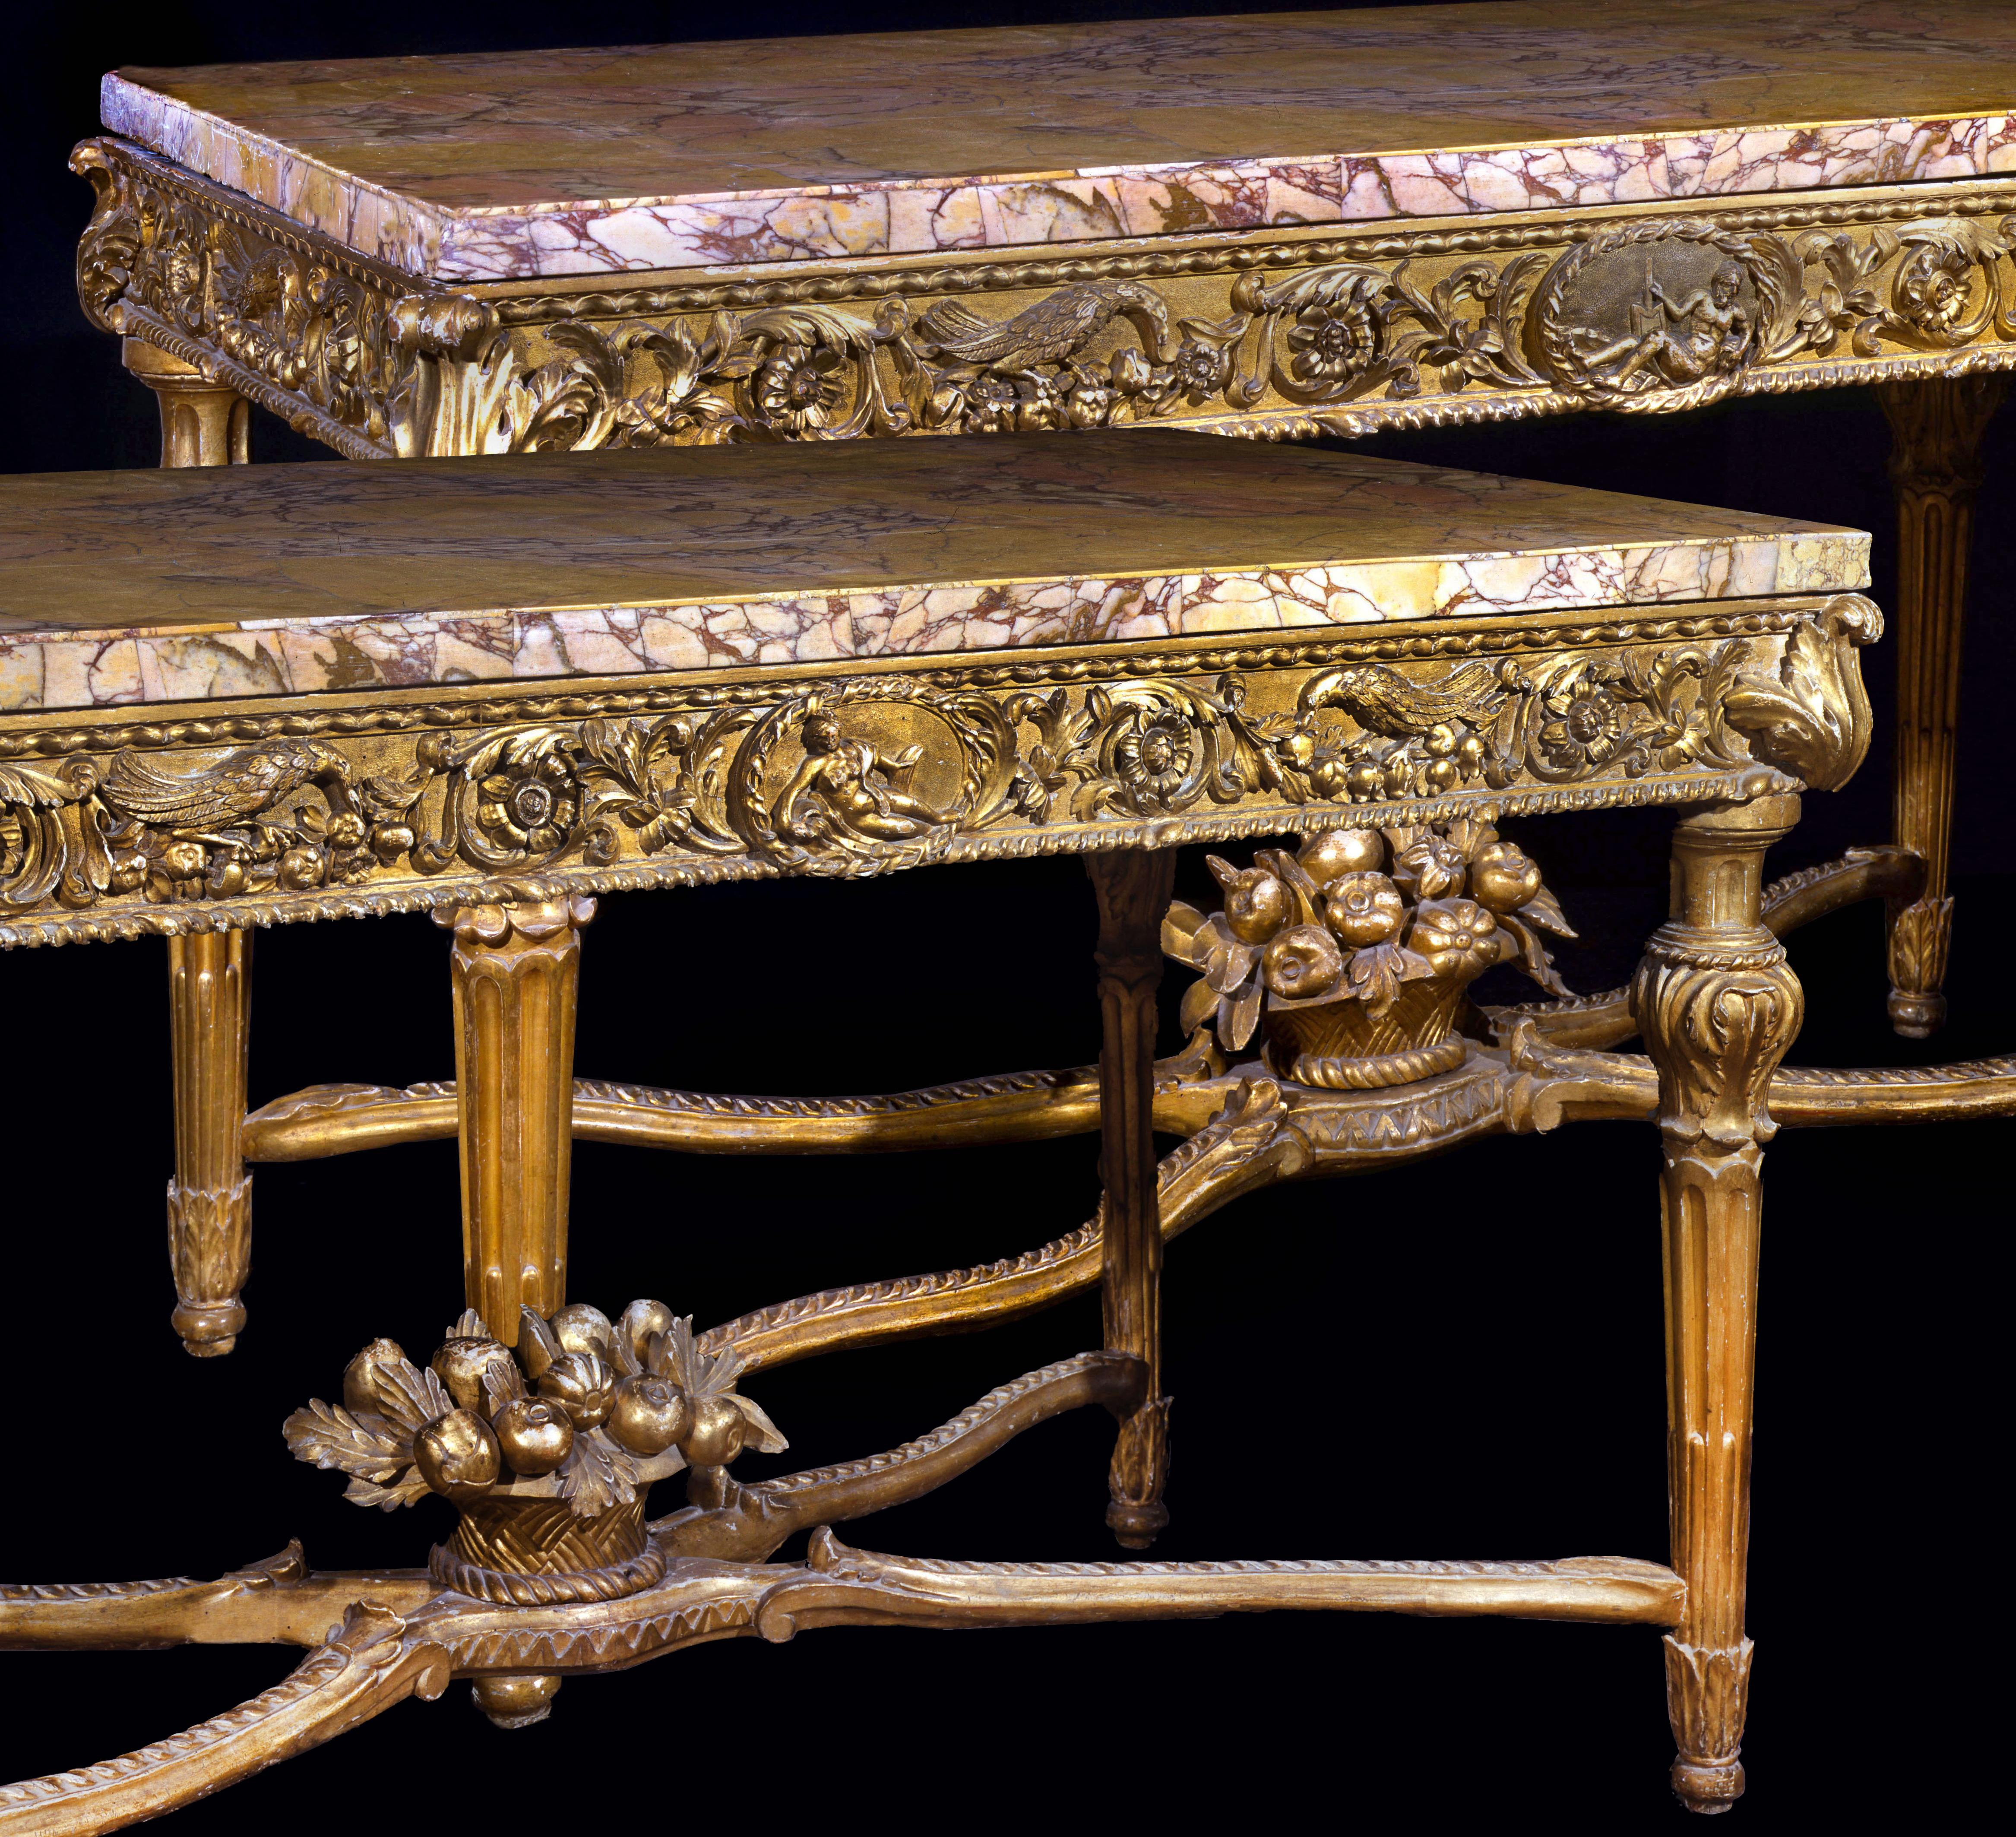 A very fine and important pair of Italian carved gilt-wood console tables, Roman, circa 1770
Each with a rectangular back, yellow and white marble top, above a frieze centered by a roundel, one with a recumbent male figure the other with a female